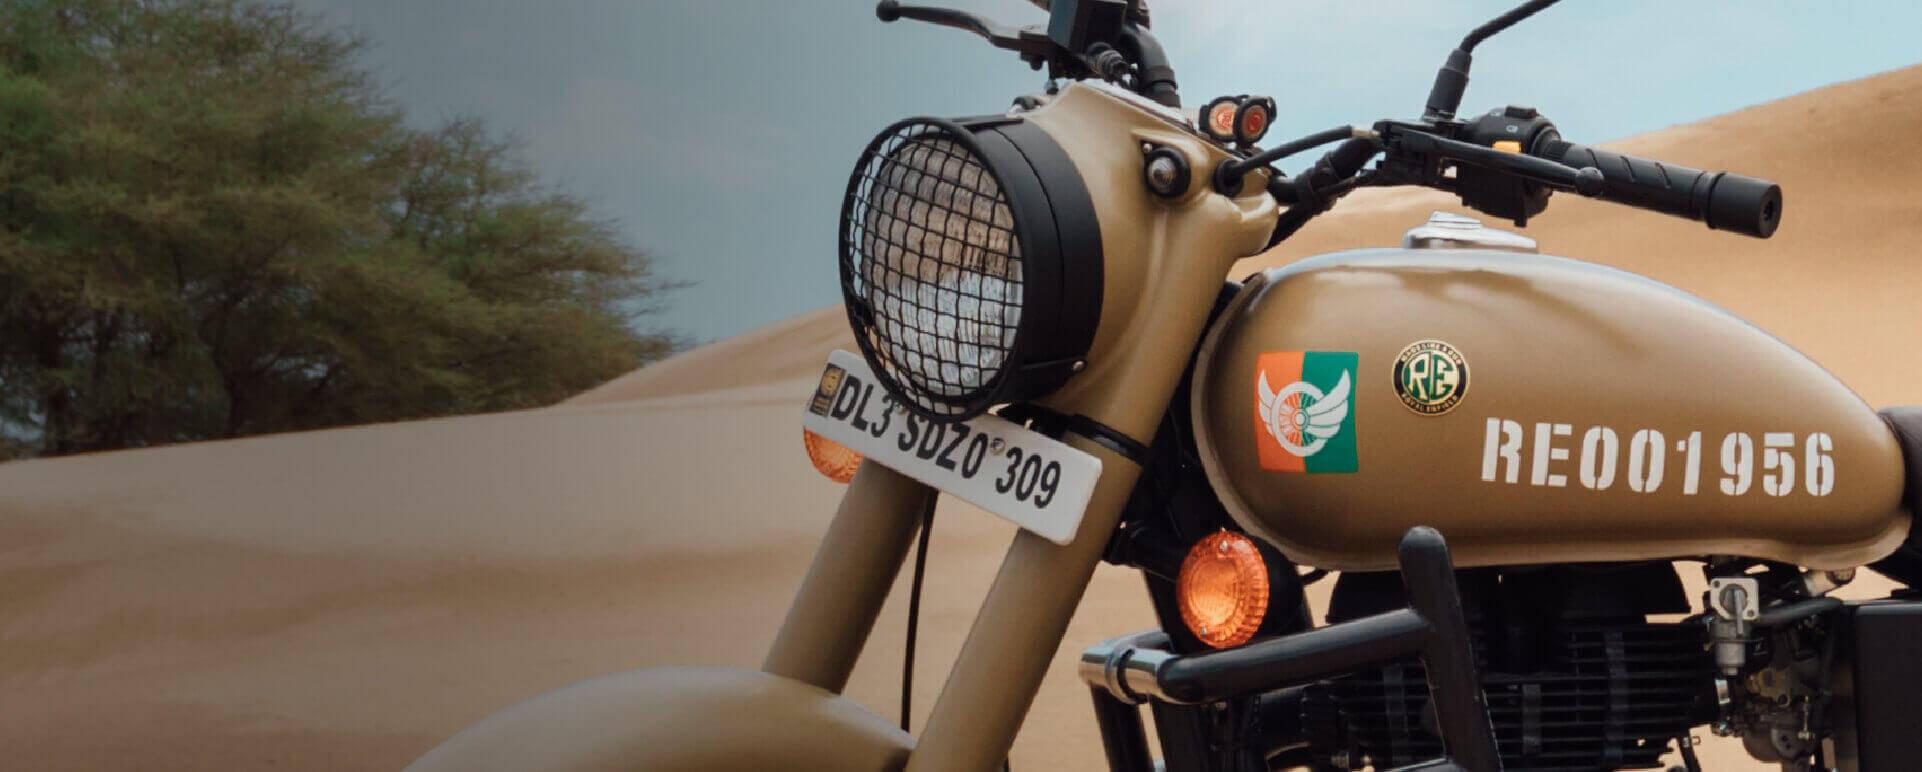 Royal Enfield Classic 350 Signals Photo Enfield